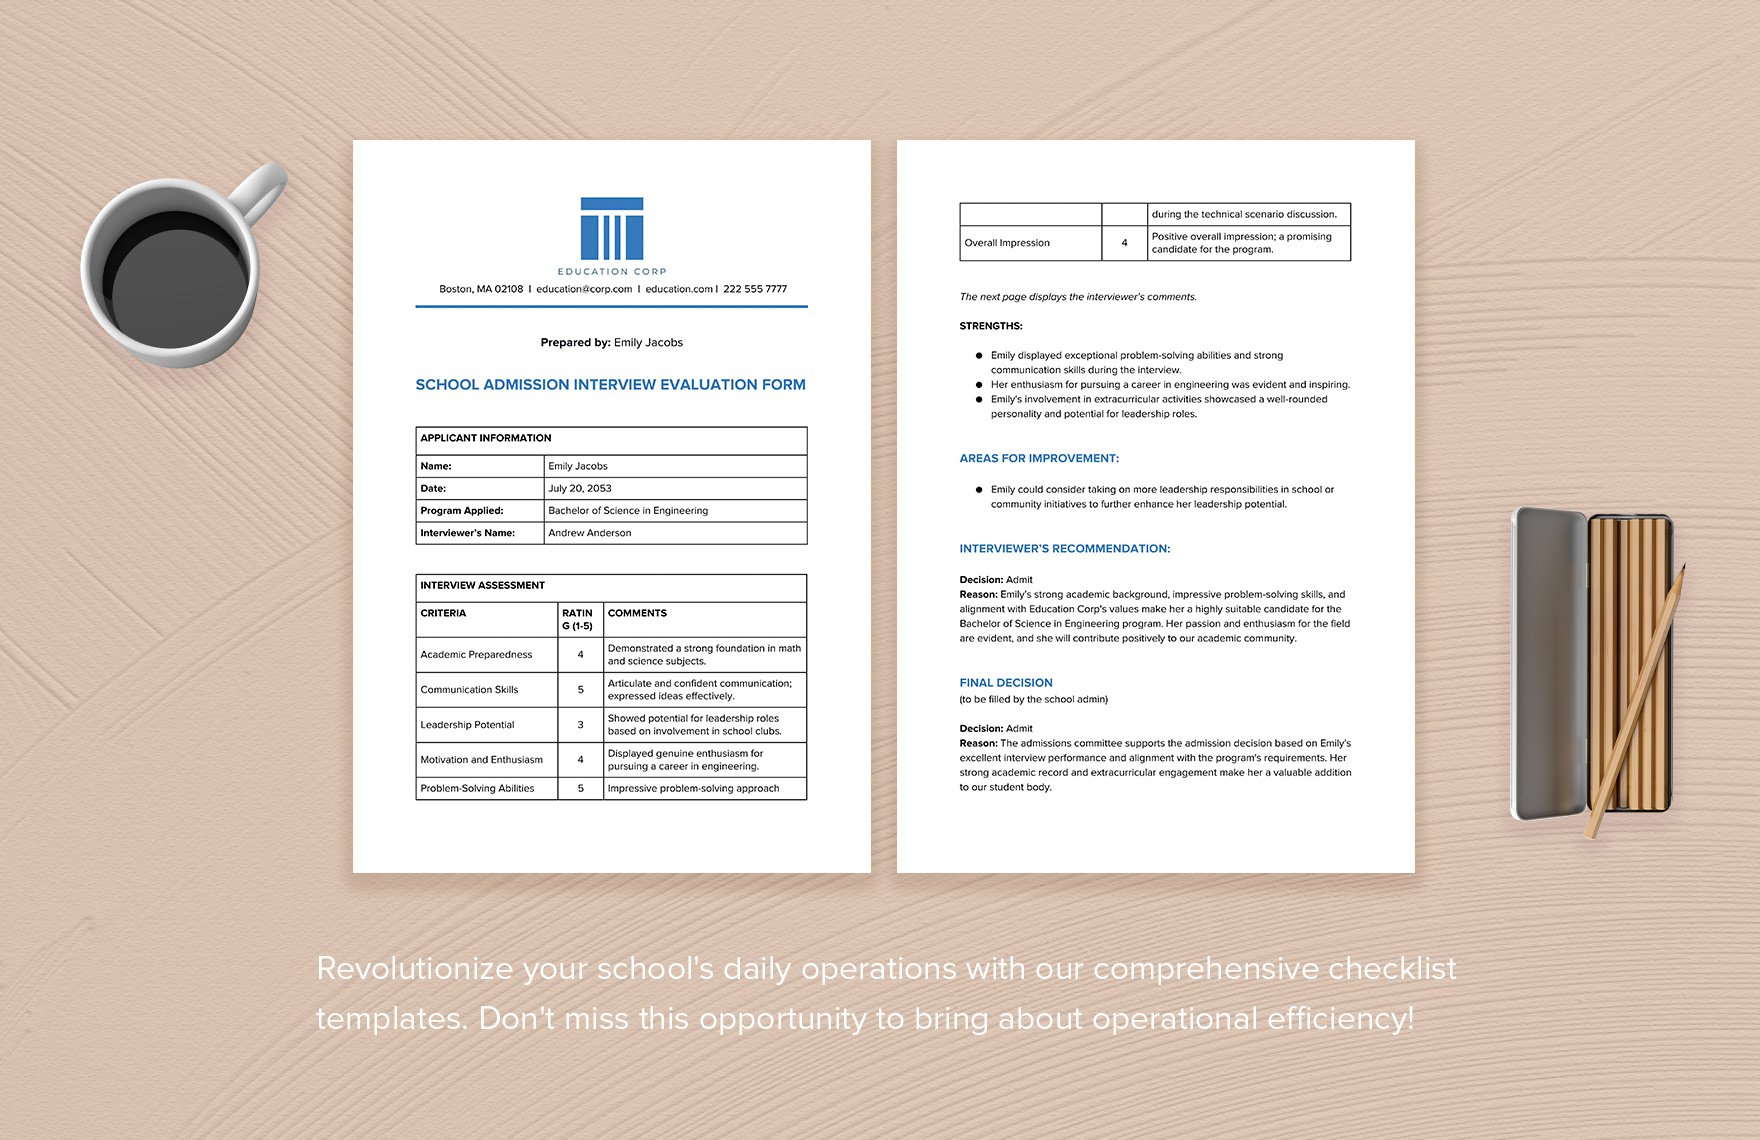 School Admission Interview Evaluation Form Template